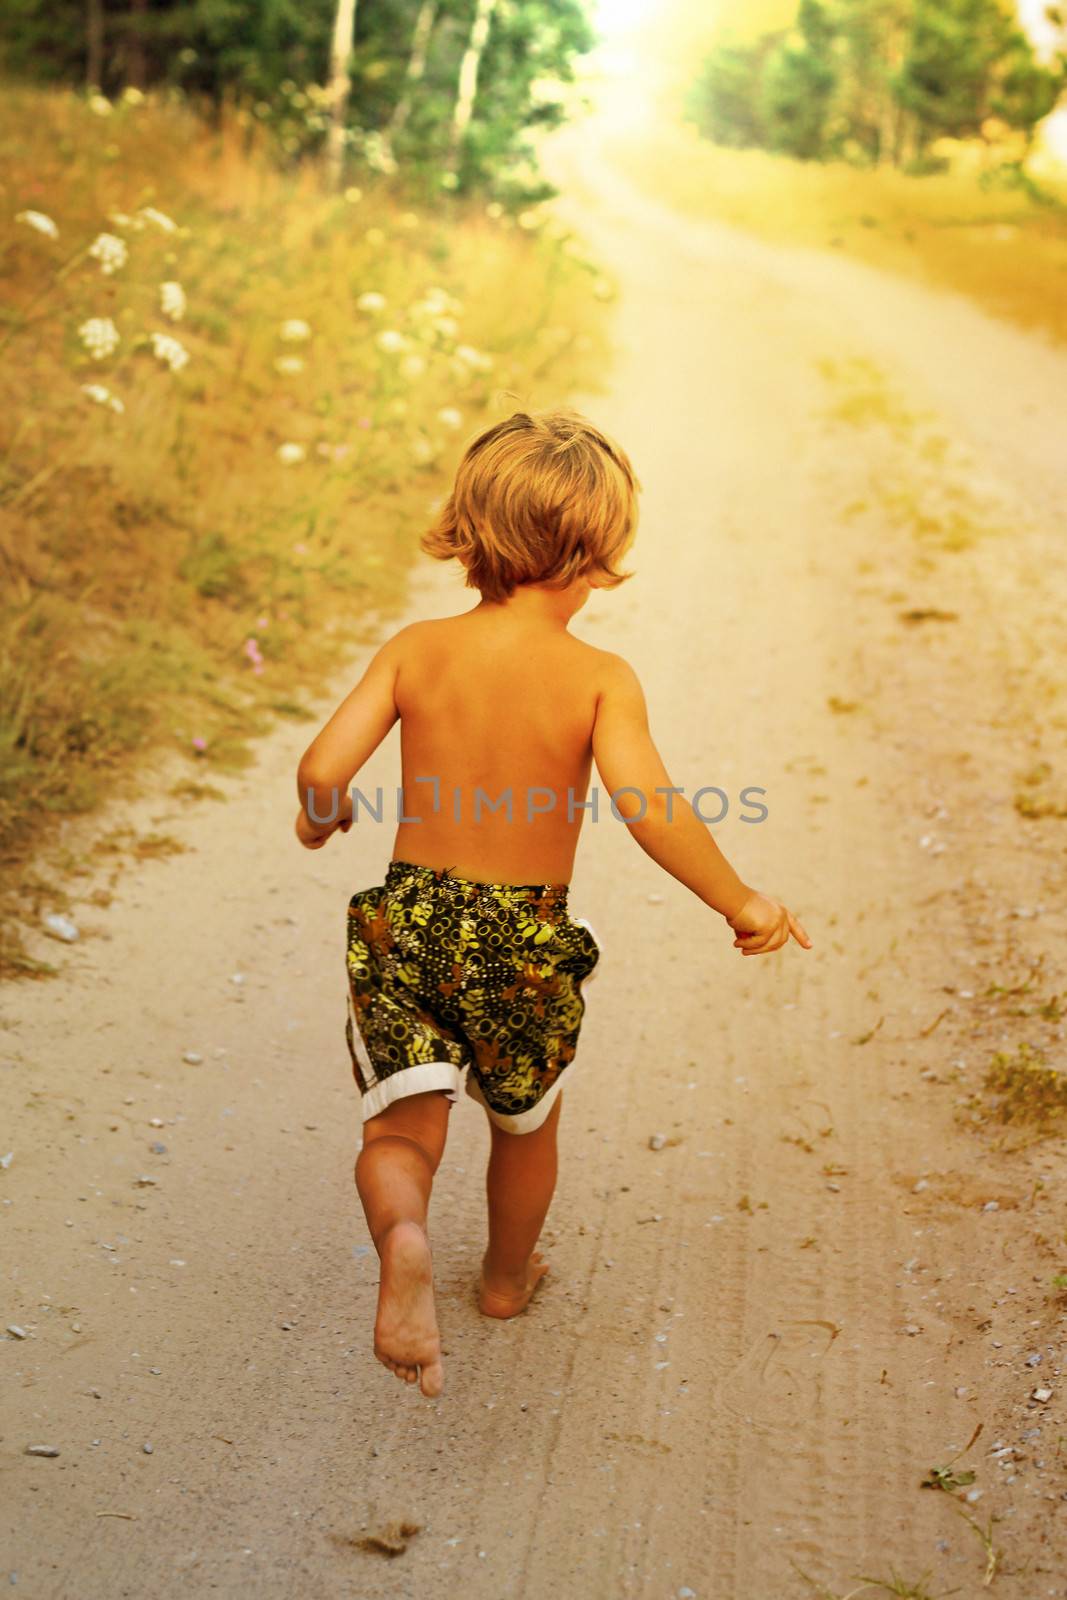 Boy running along road in park, outdoor by anelina